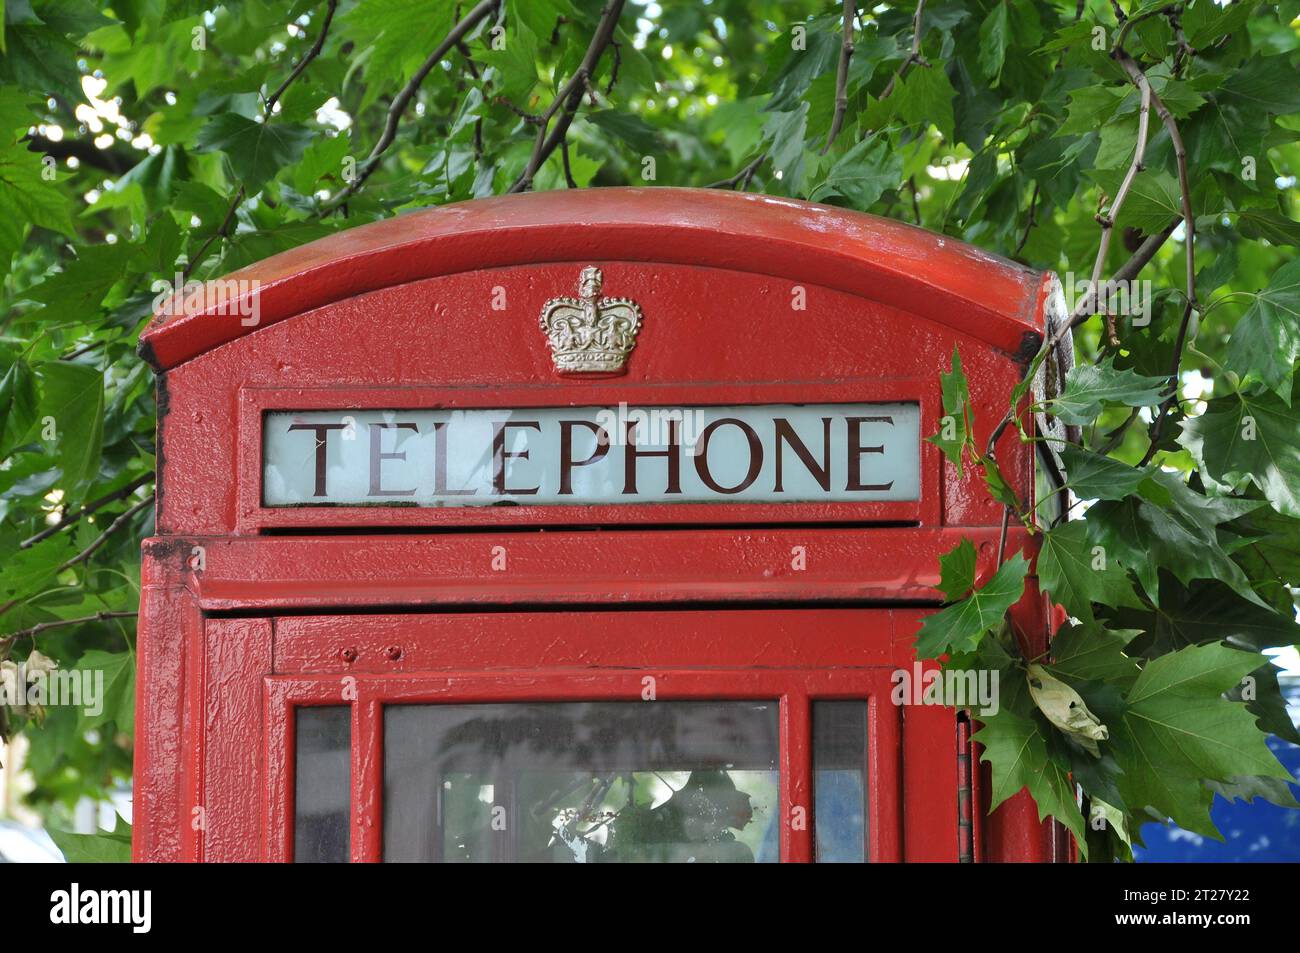 The upper section of a traditional British red telephone booth framed by lush green maple leaves. Stock Photo